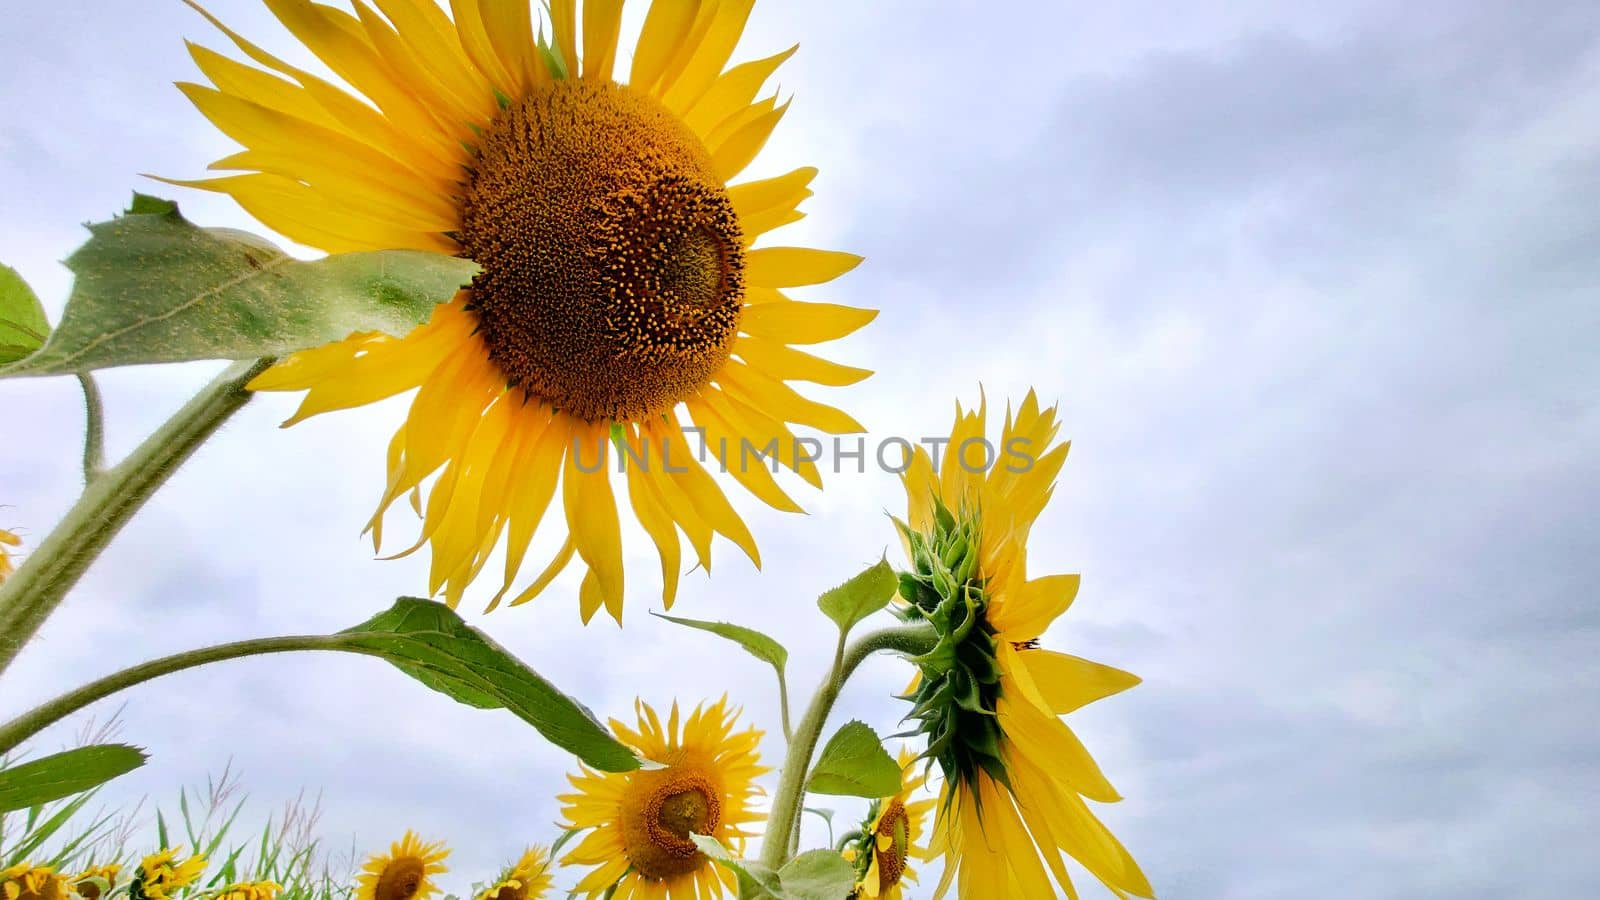 Bright yellow sunflowers growing in a field on a cloudy day view from below.Texture or background.